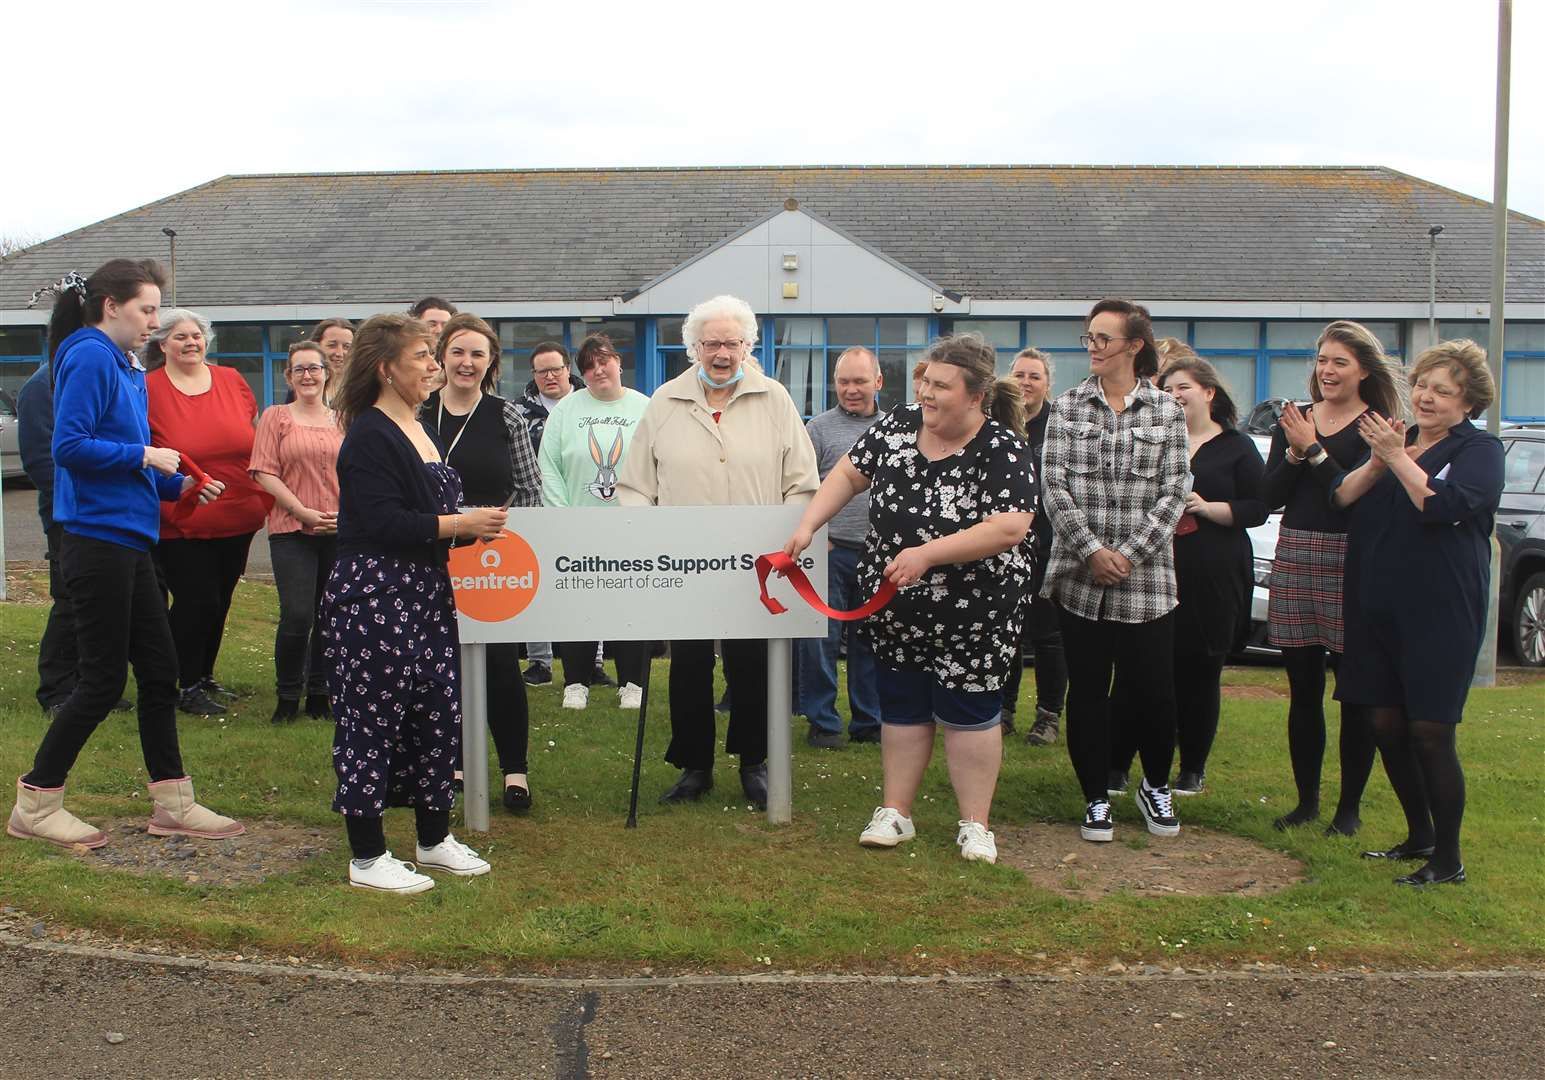 Centred held a ribbon-cutting ceremony at its Wick base in May to mark its rebranding.